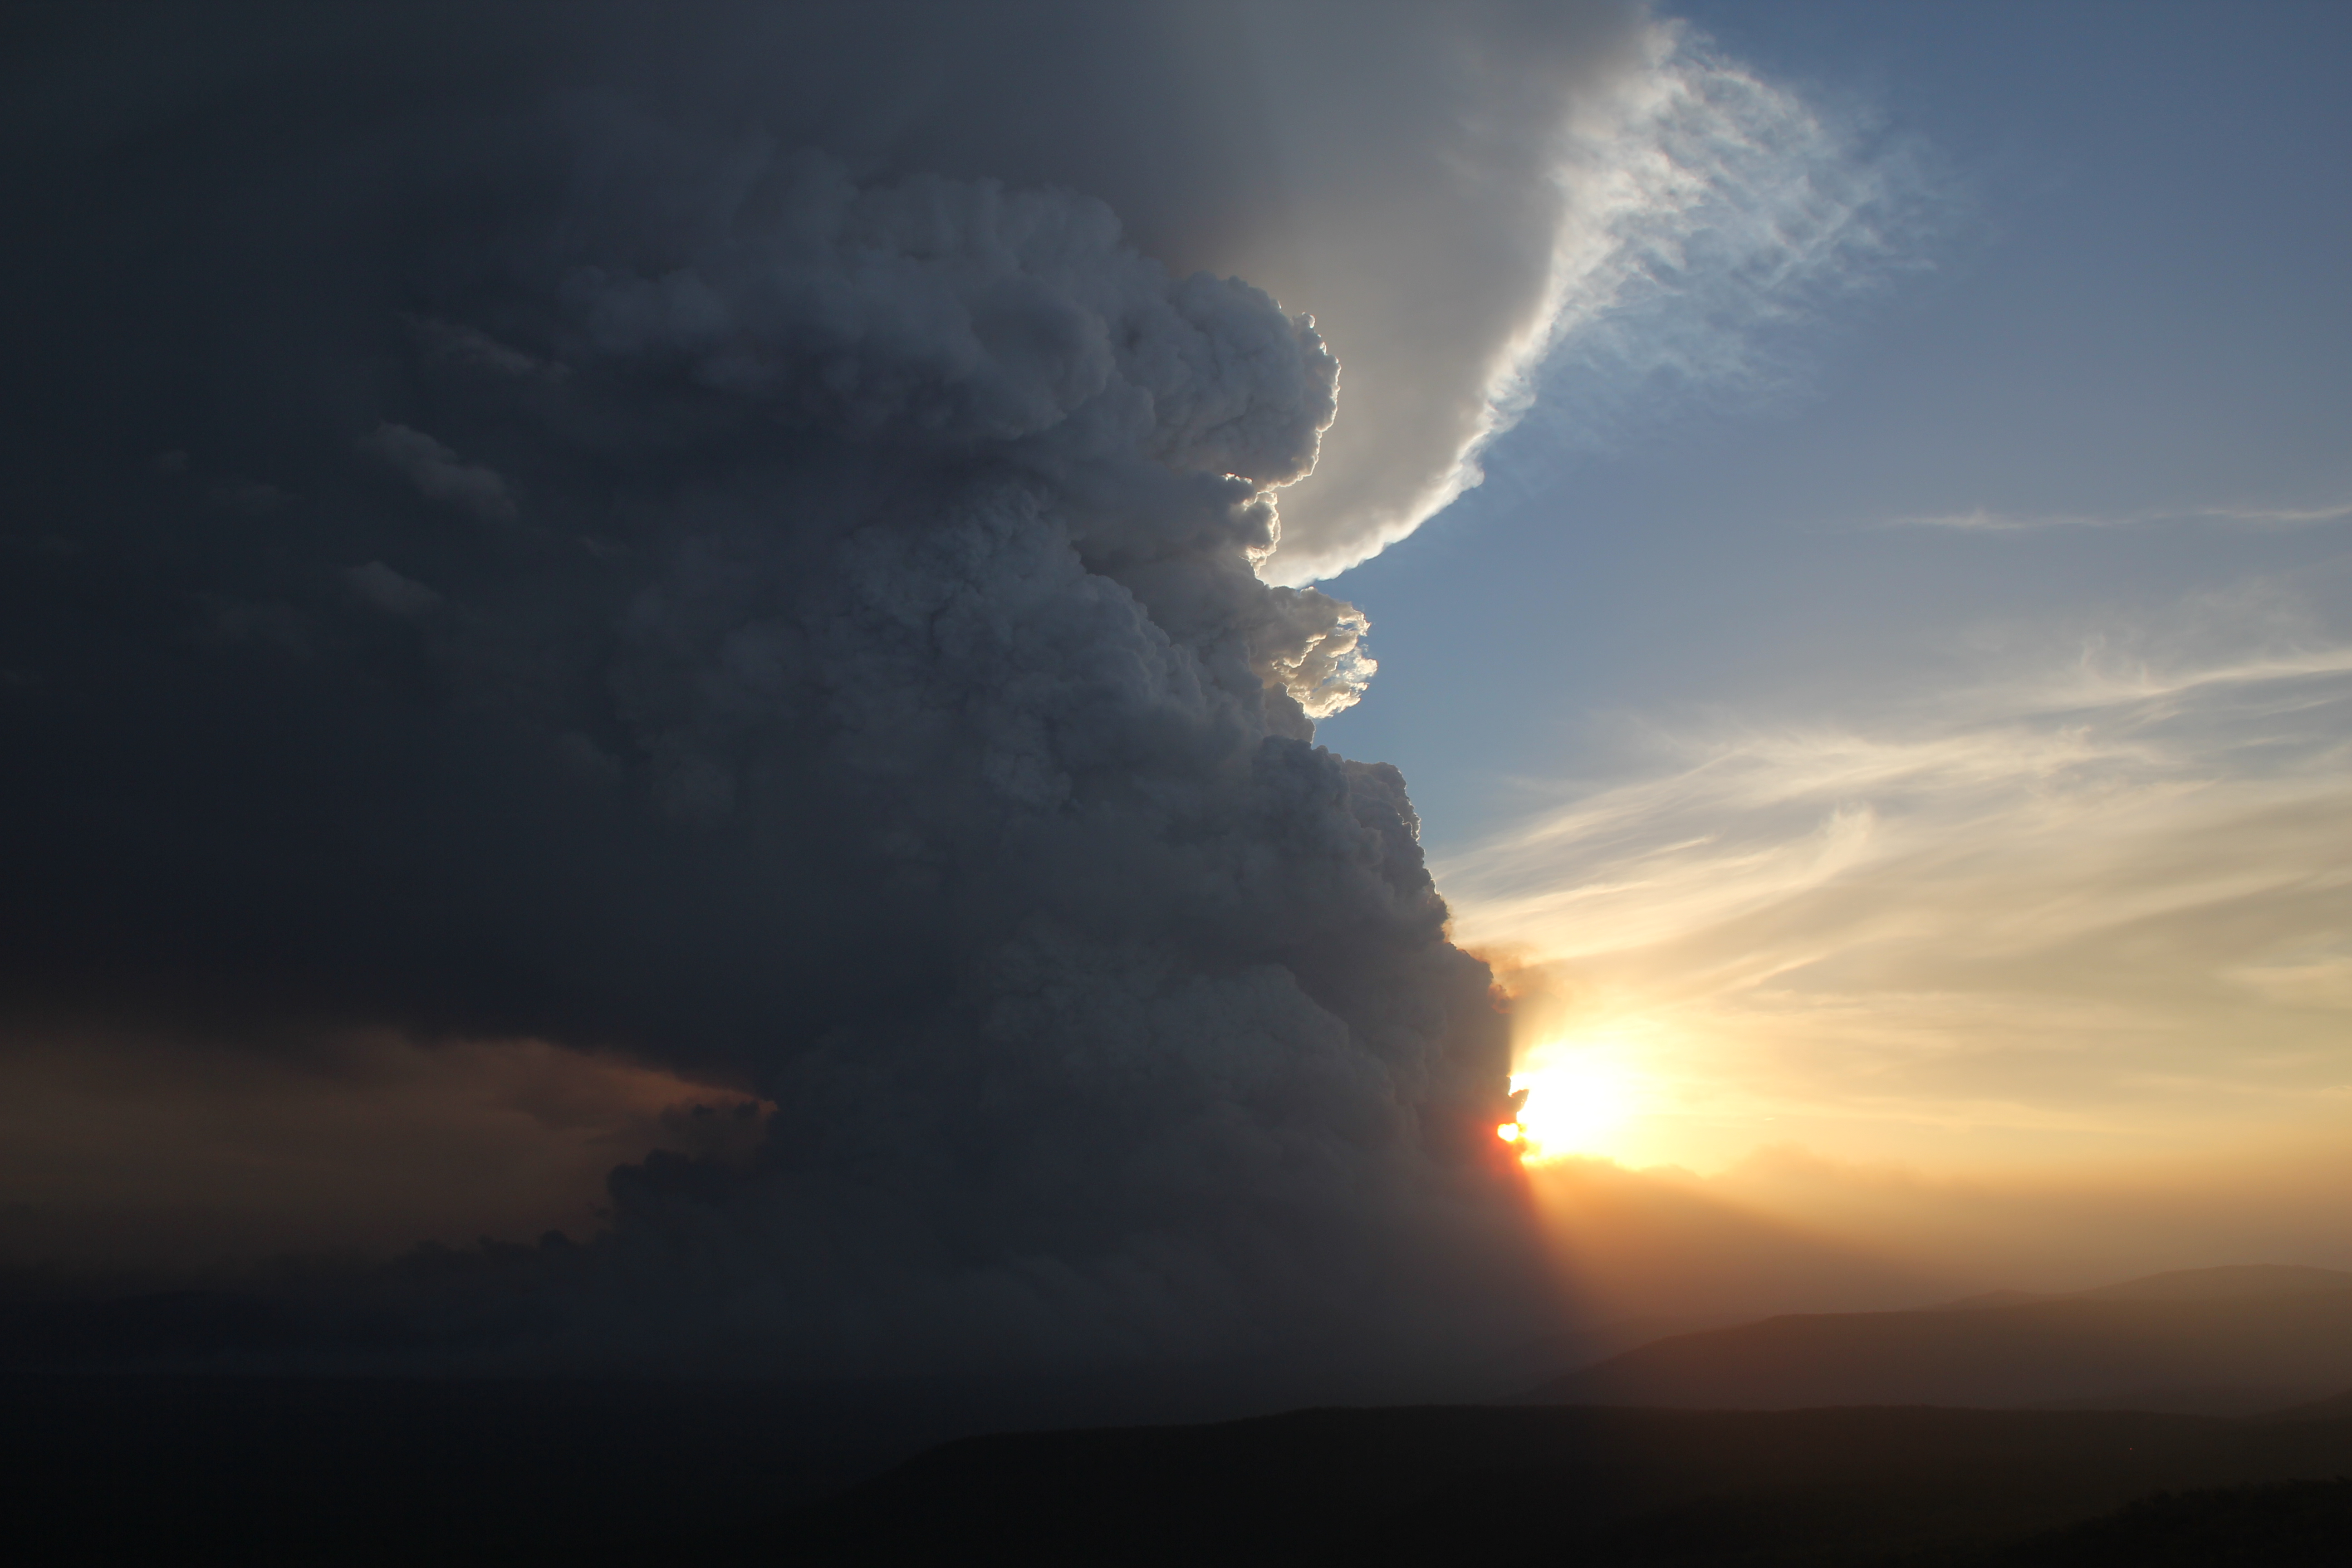 A fully developed pyrocumulus cloud, formed from the smoke plume of the Grampians fire in February 2013. Credit: Randall Bacon